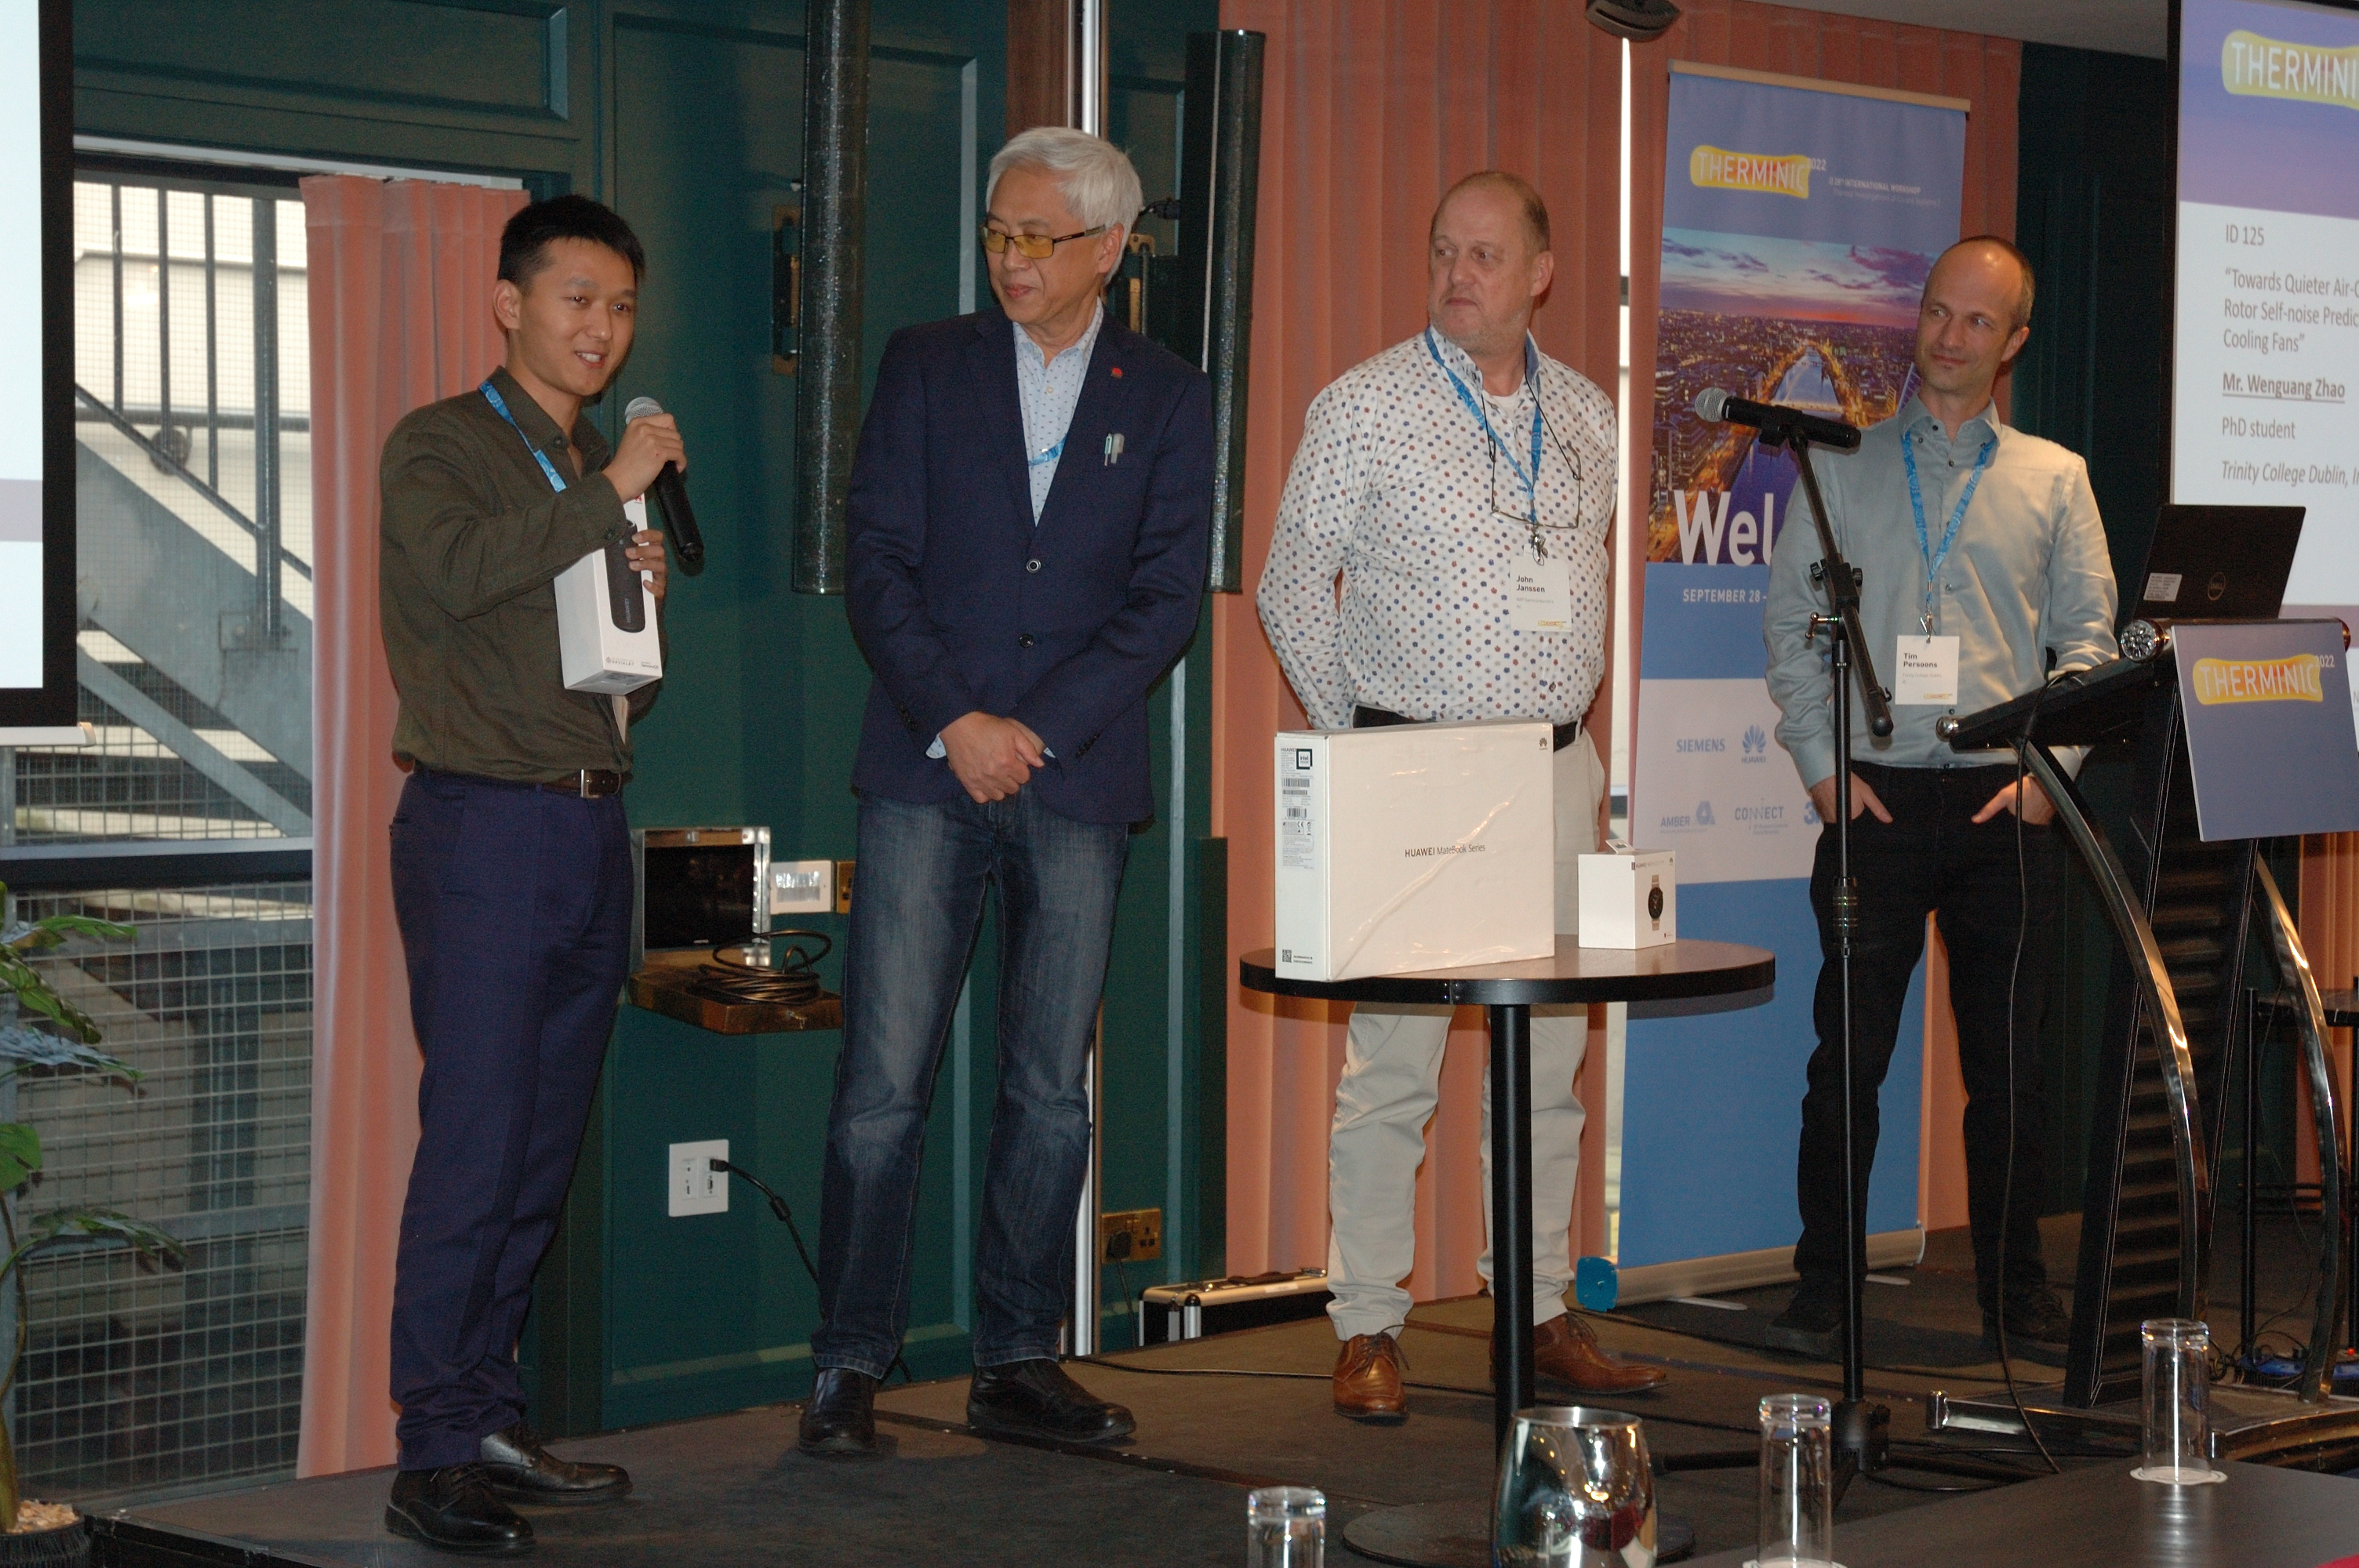 THERMINIC 2022 Best Poster Award winner Wenguang Zhao